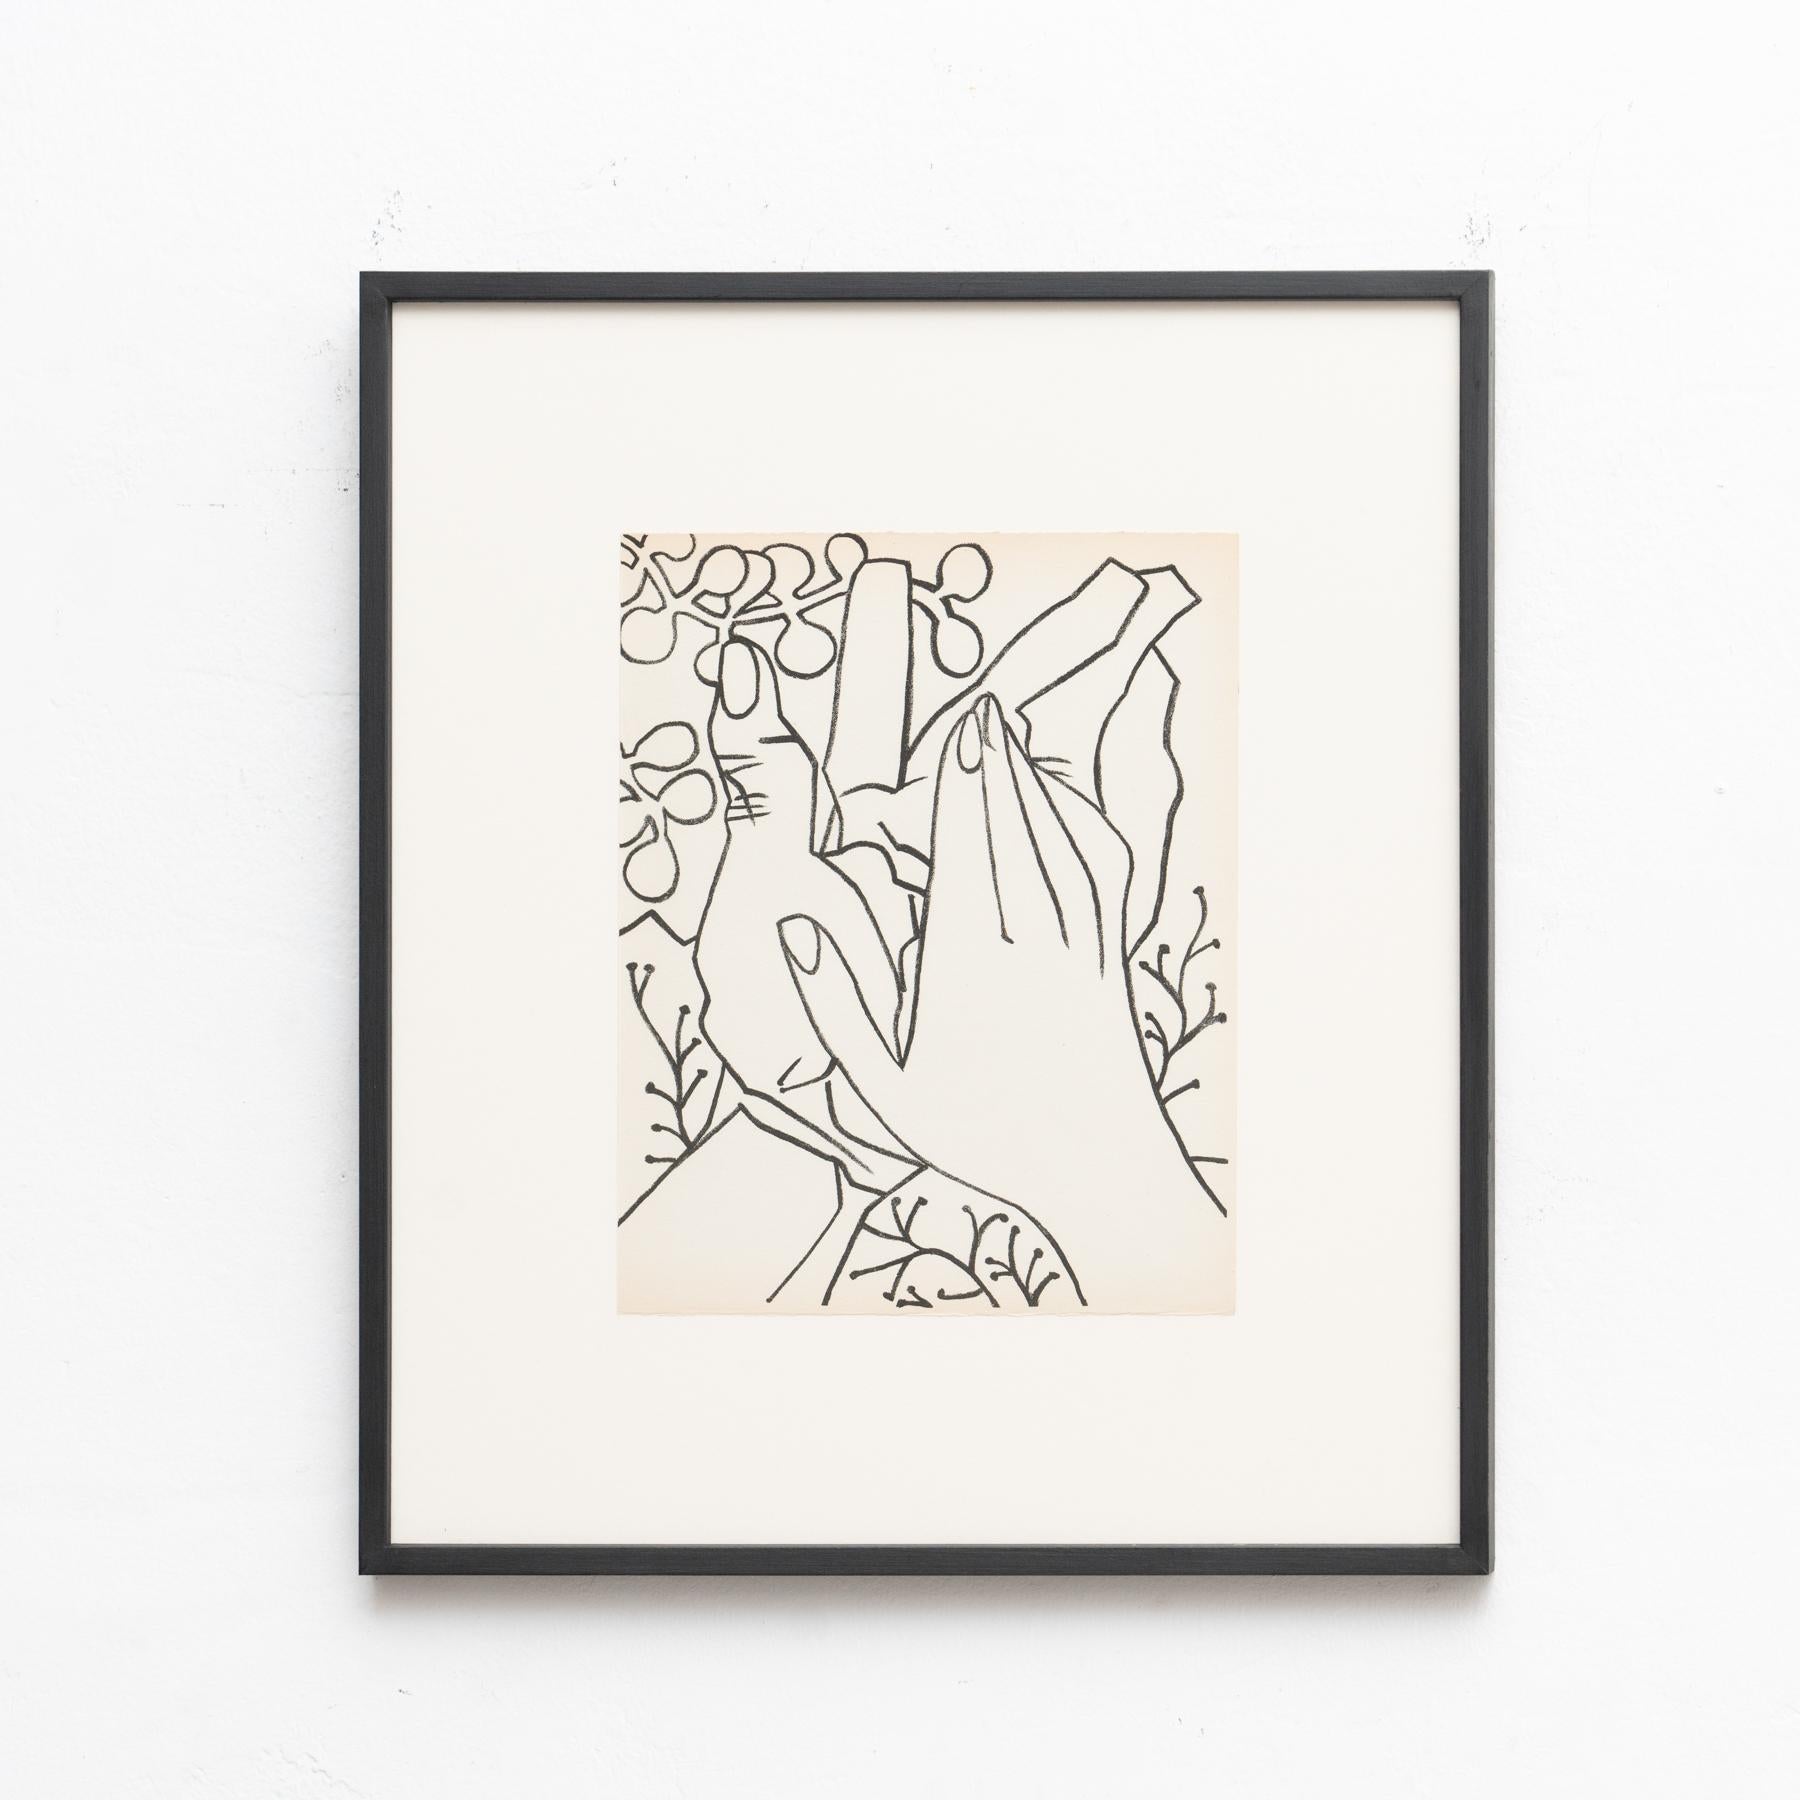 Françoise Gilot original lithograph 'The Caress'.

Made in France, circa 1951.

Printed by Mourlot in 366 copies.

Framed.

In good original condition, with minor wear consistent with age and use, preserving a beautiful patina.

Marie Françoise